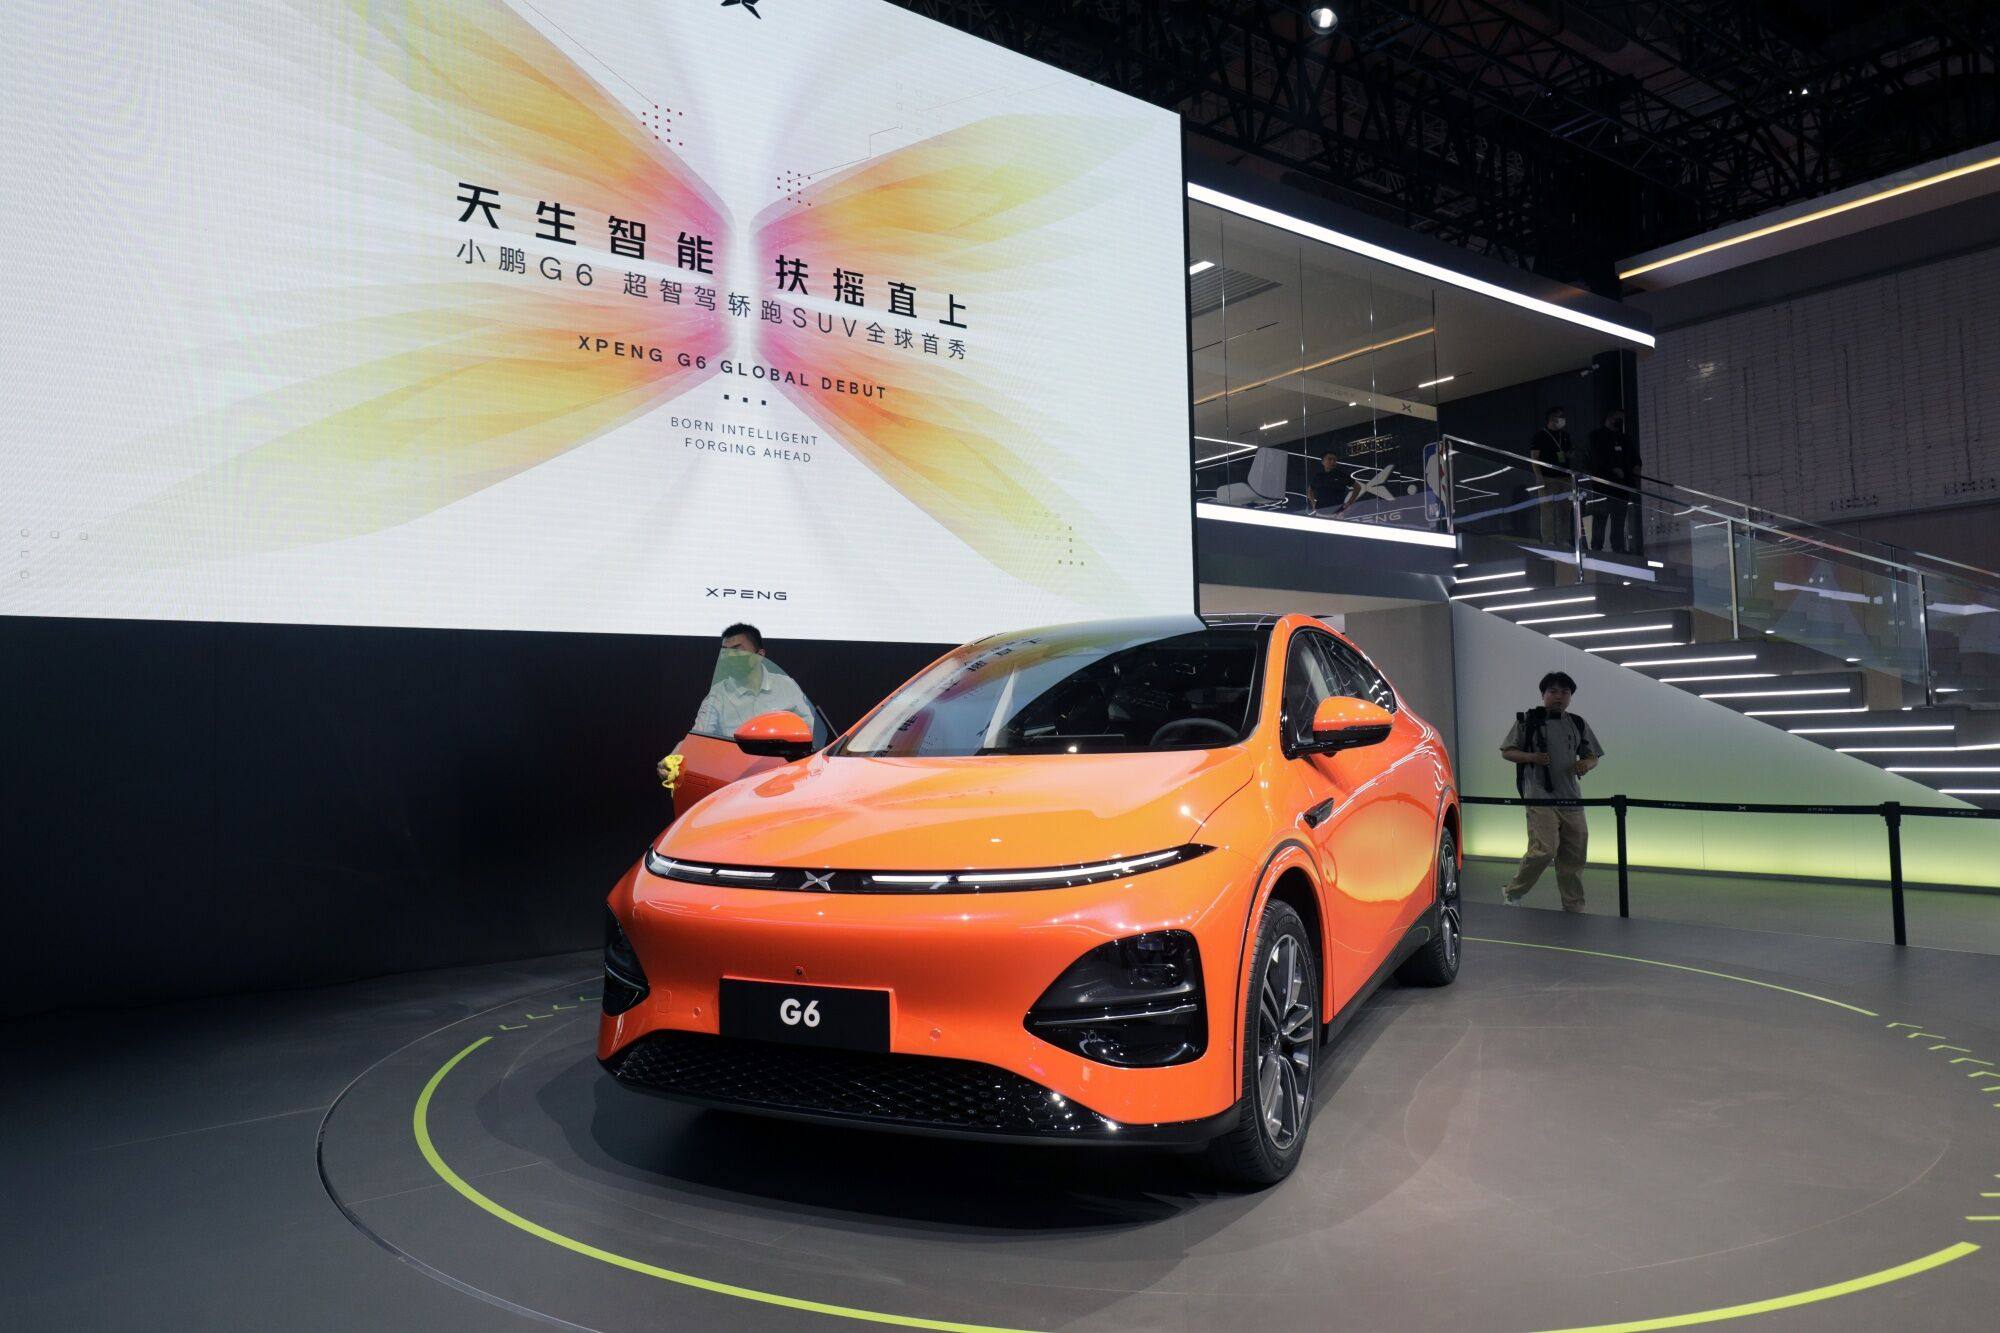 Shanghai Auto Show: Chinese EV makers Nio, Xpeng and Li Auto steal the ...